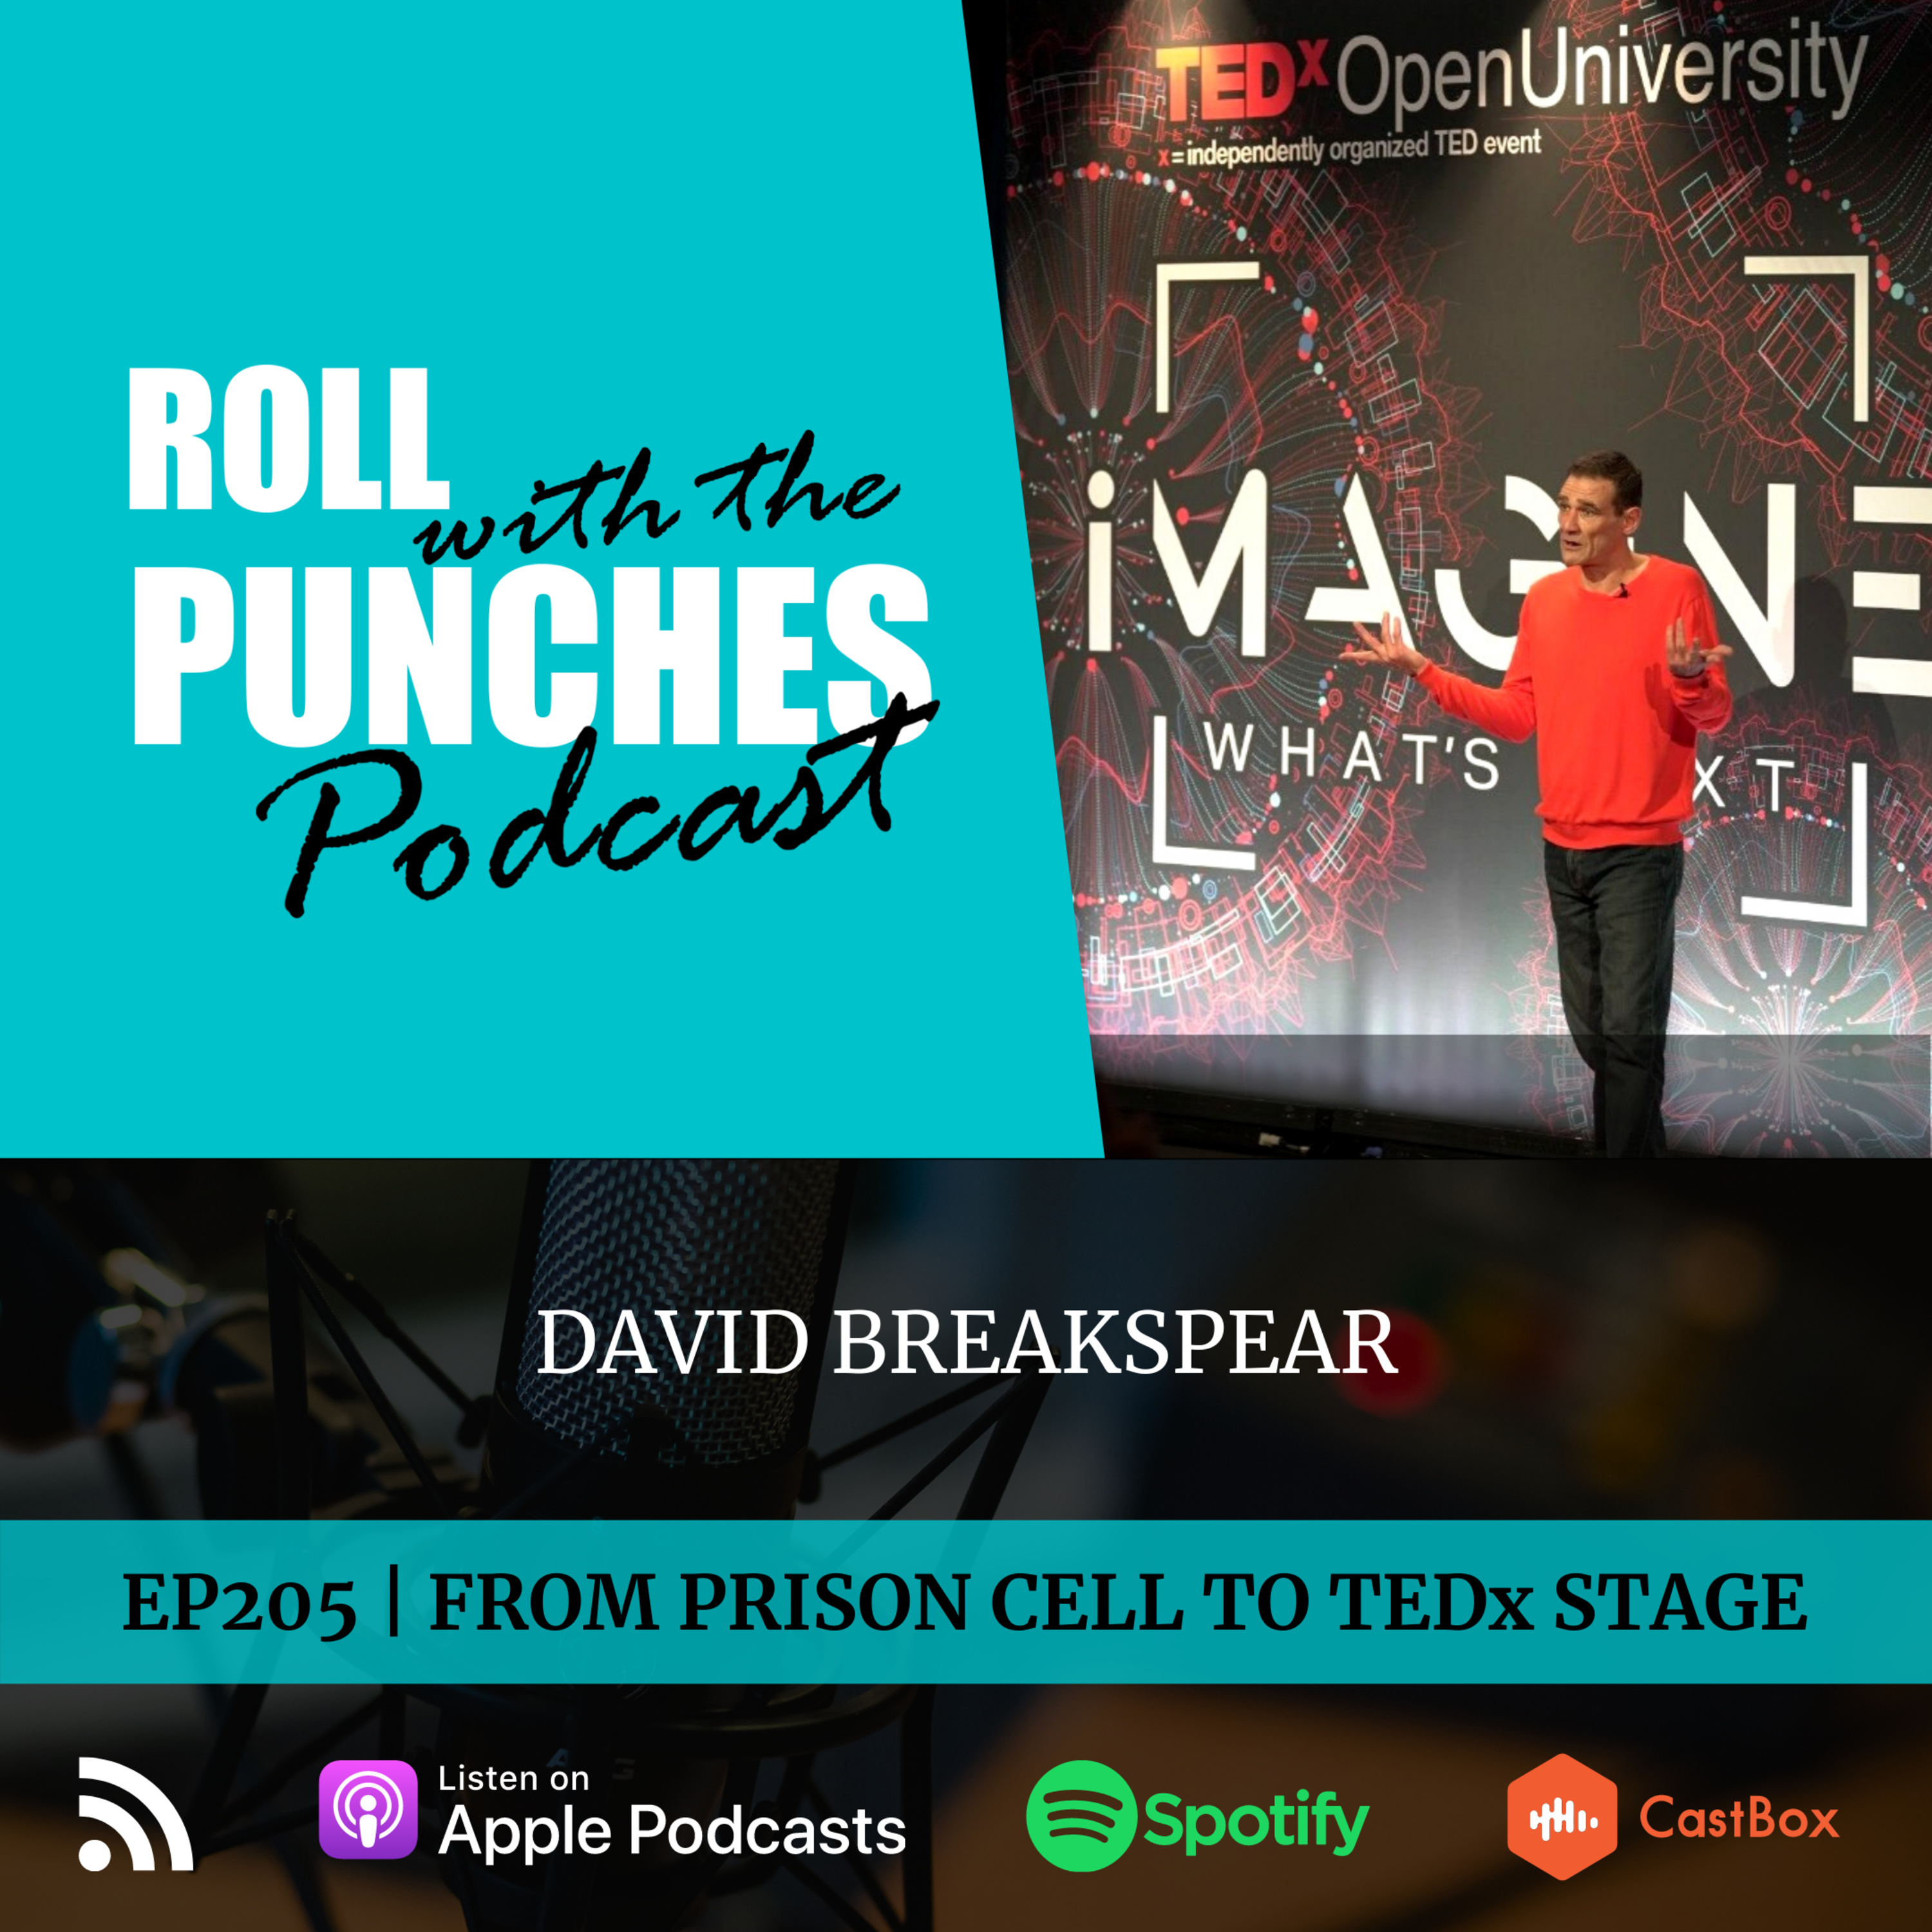 EP205 From Prison Cell To TEDx Stage | David Breakspear